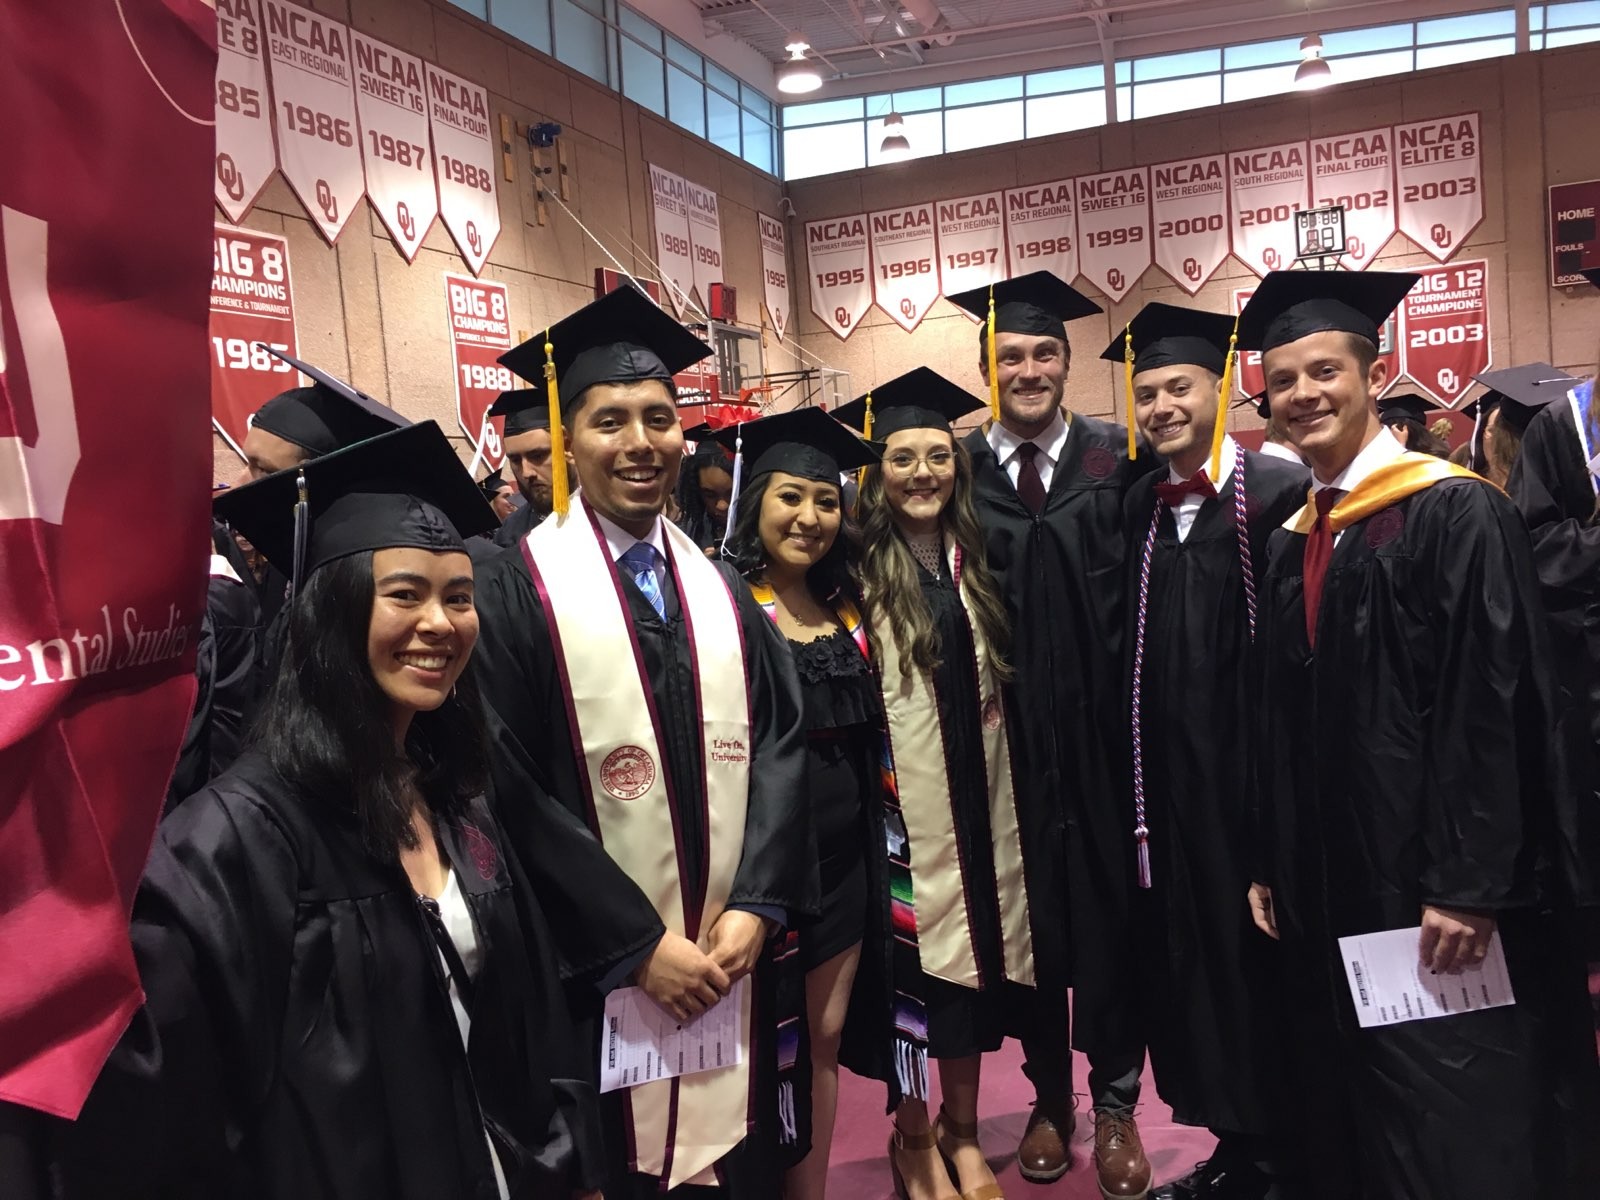 Seven students in caps and gowns